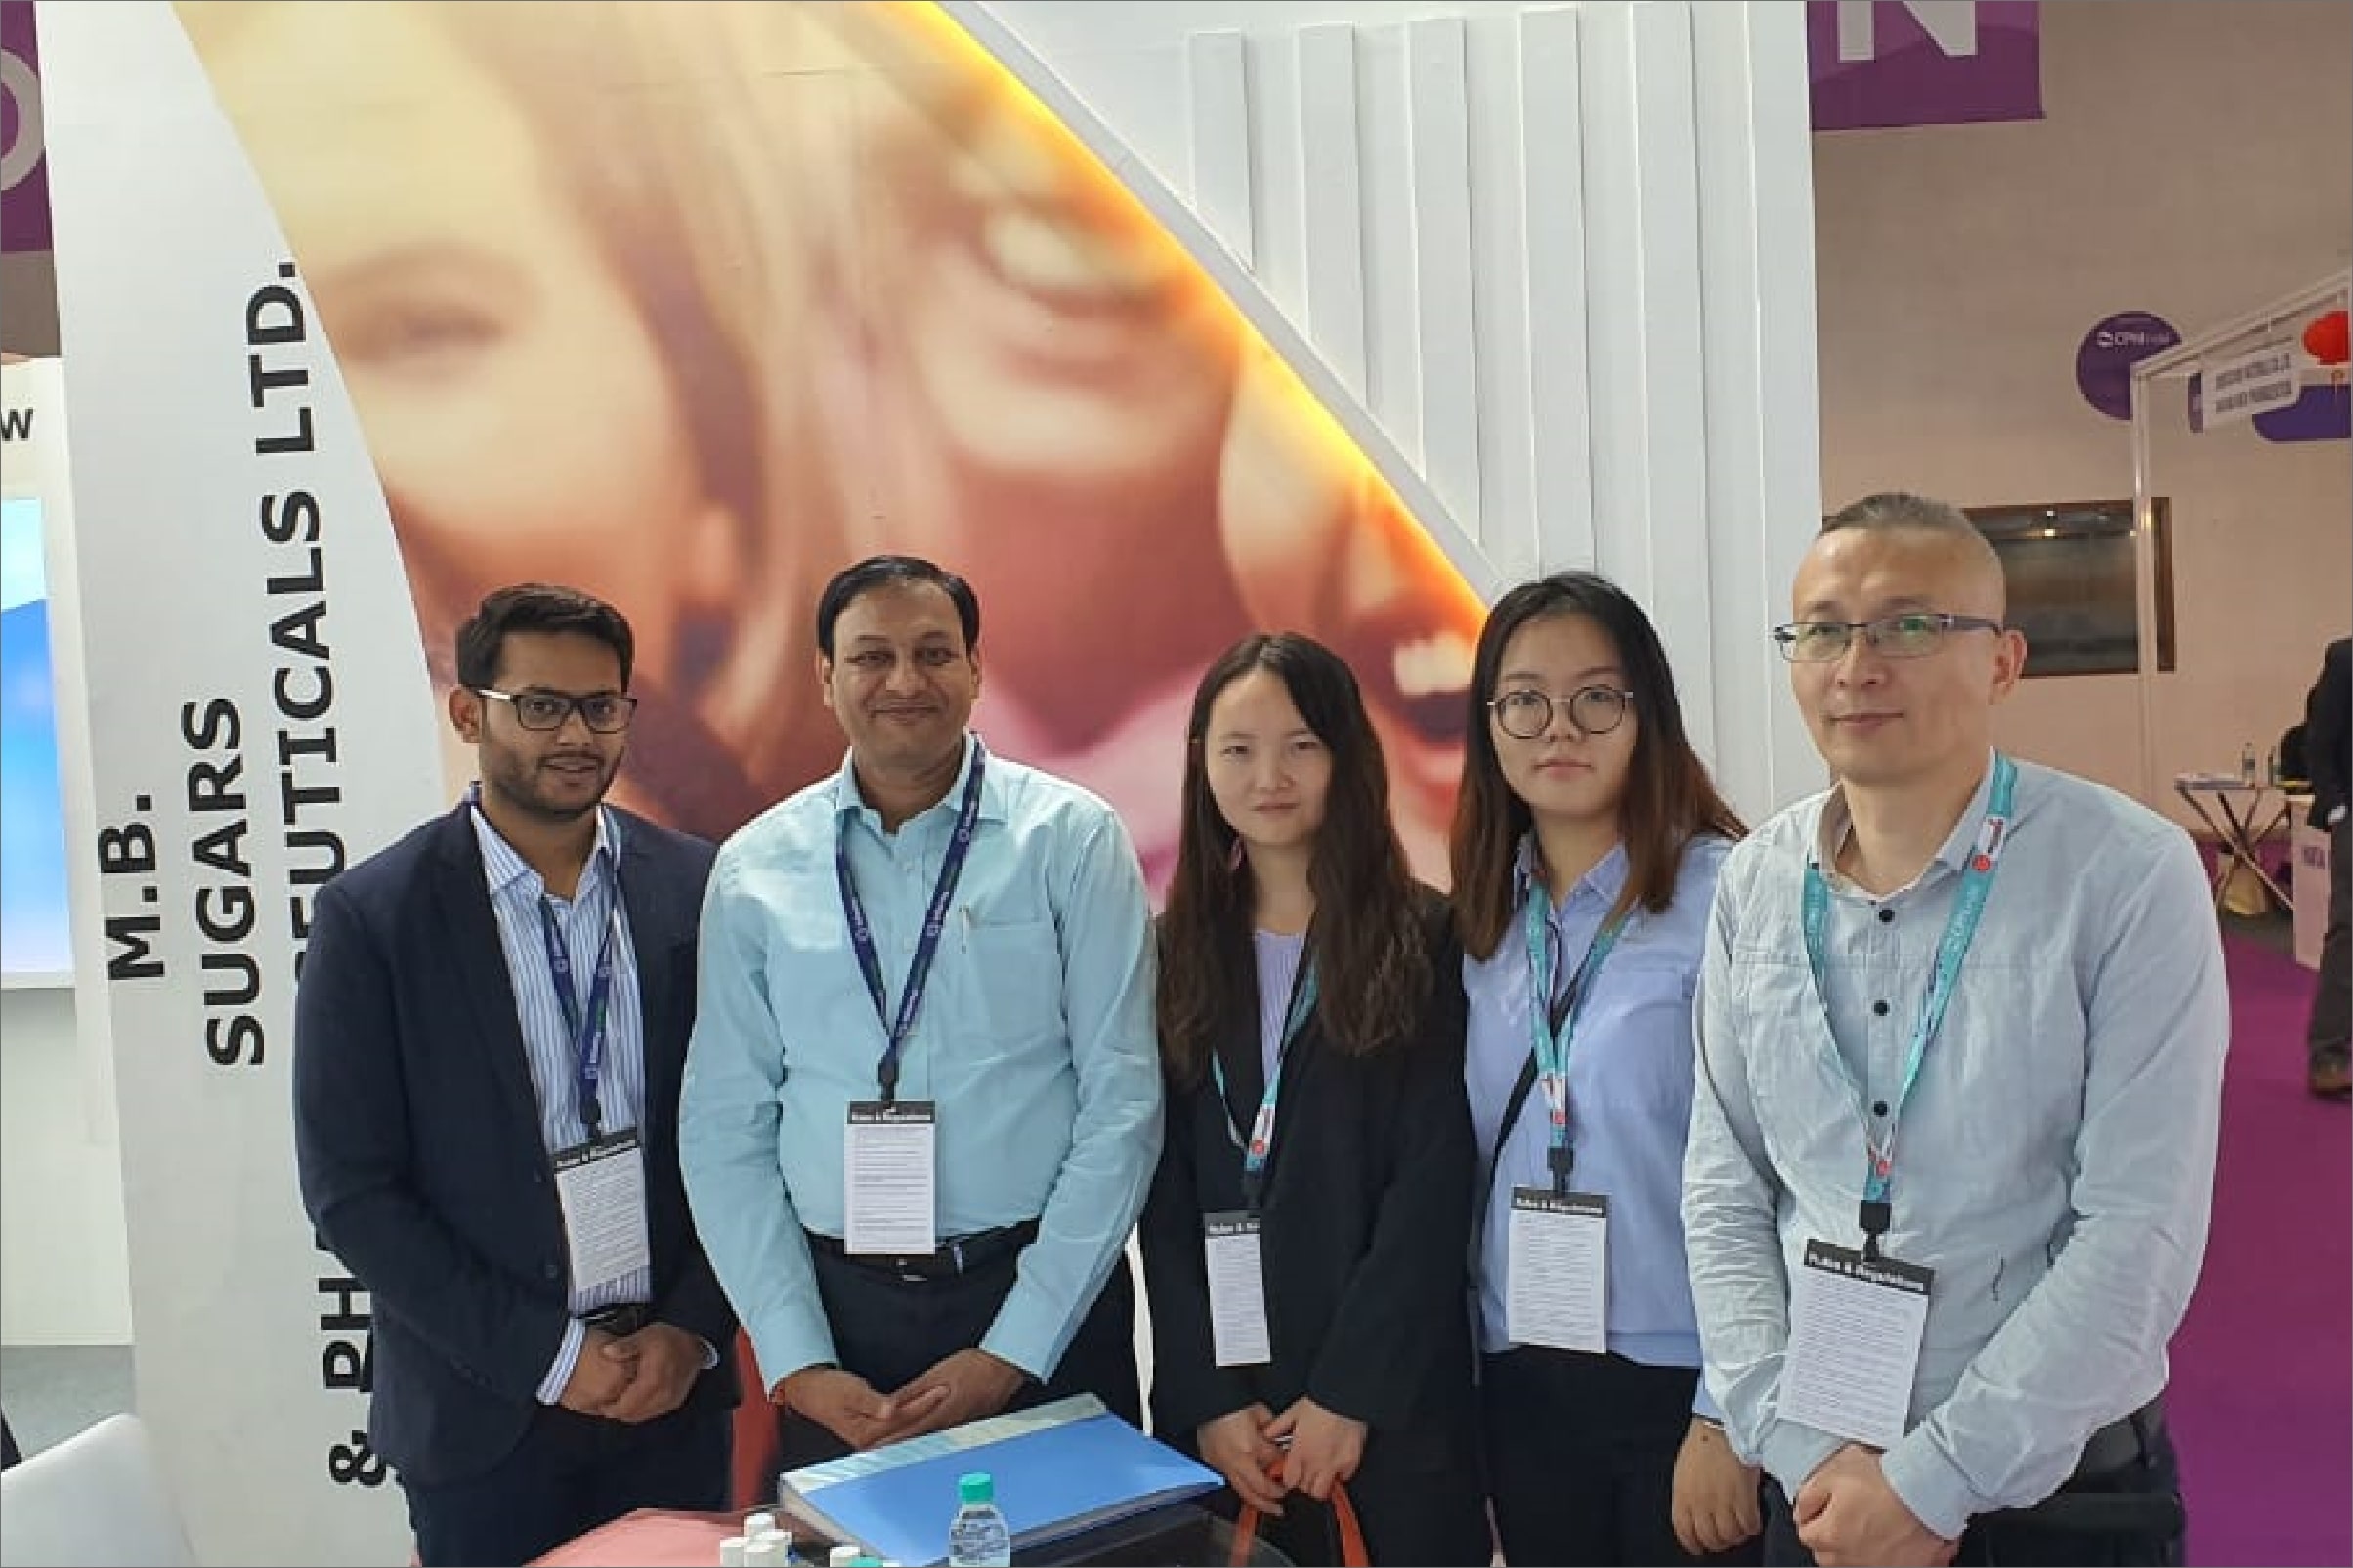 MB Sugars & Pharmaceuticals Ltd. participated in Convention on Pharmaceutical Ingredients (Cphi) Organized in Delhi in year 2019, Taiwan